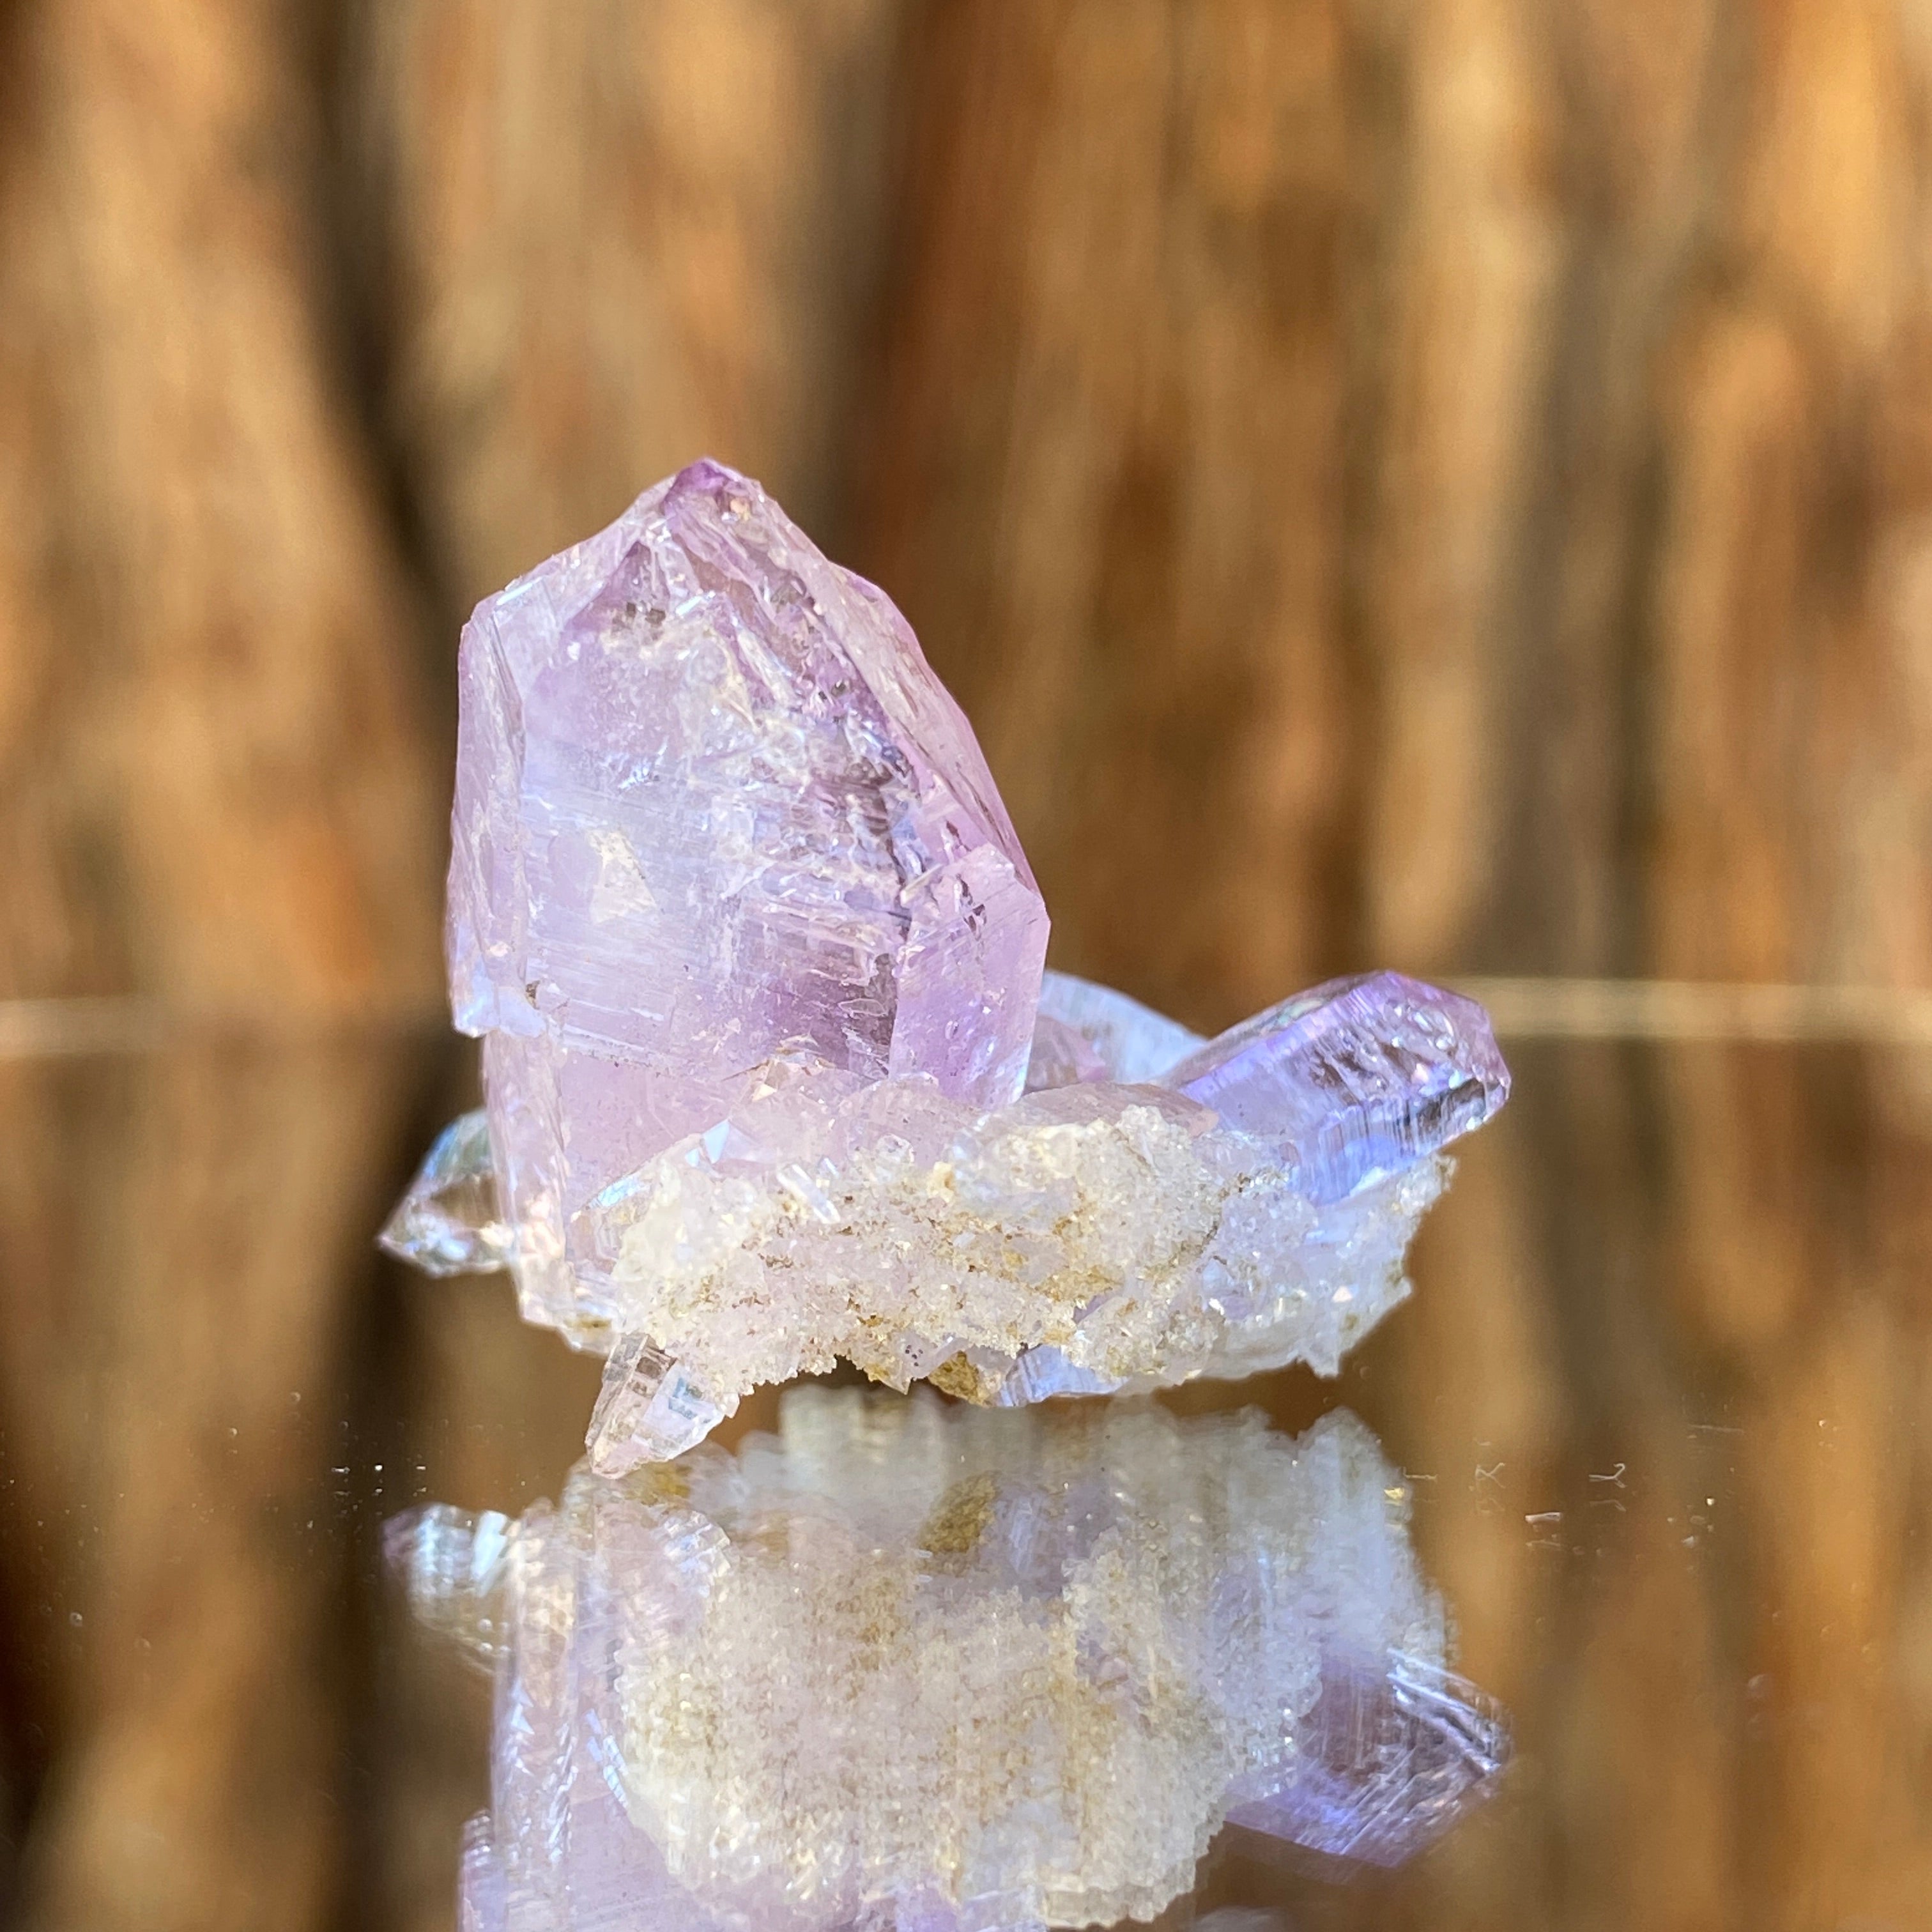 8g 3x3x2cm Pink and Purple Veracruz Amethyst from Mexico